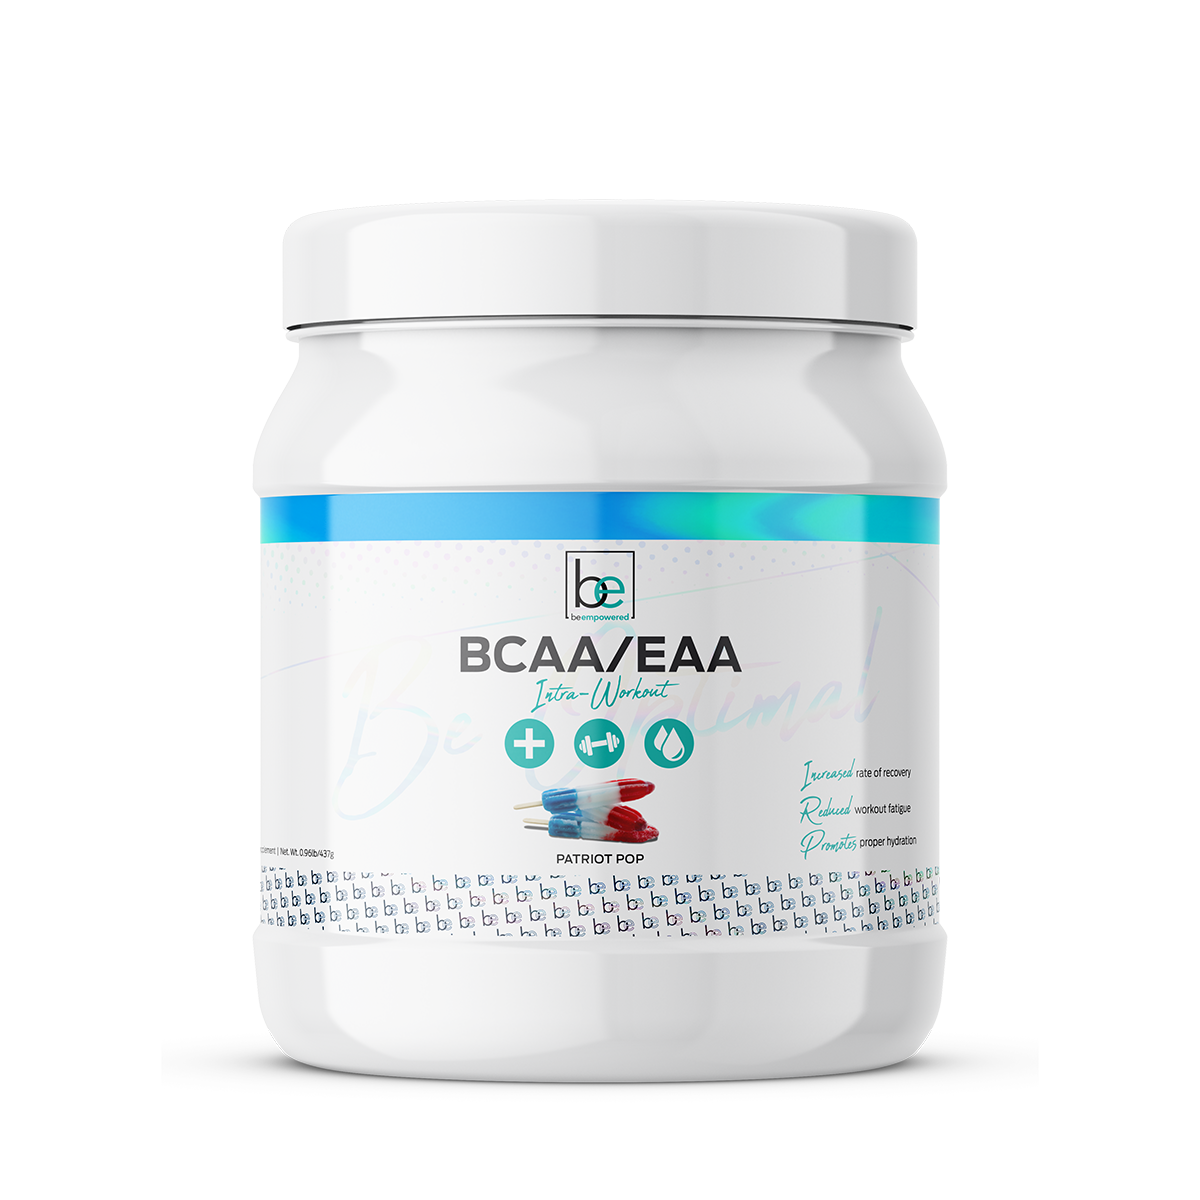 Free Gift: BCAA/EAA Intra Workout